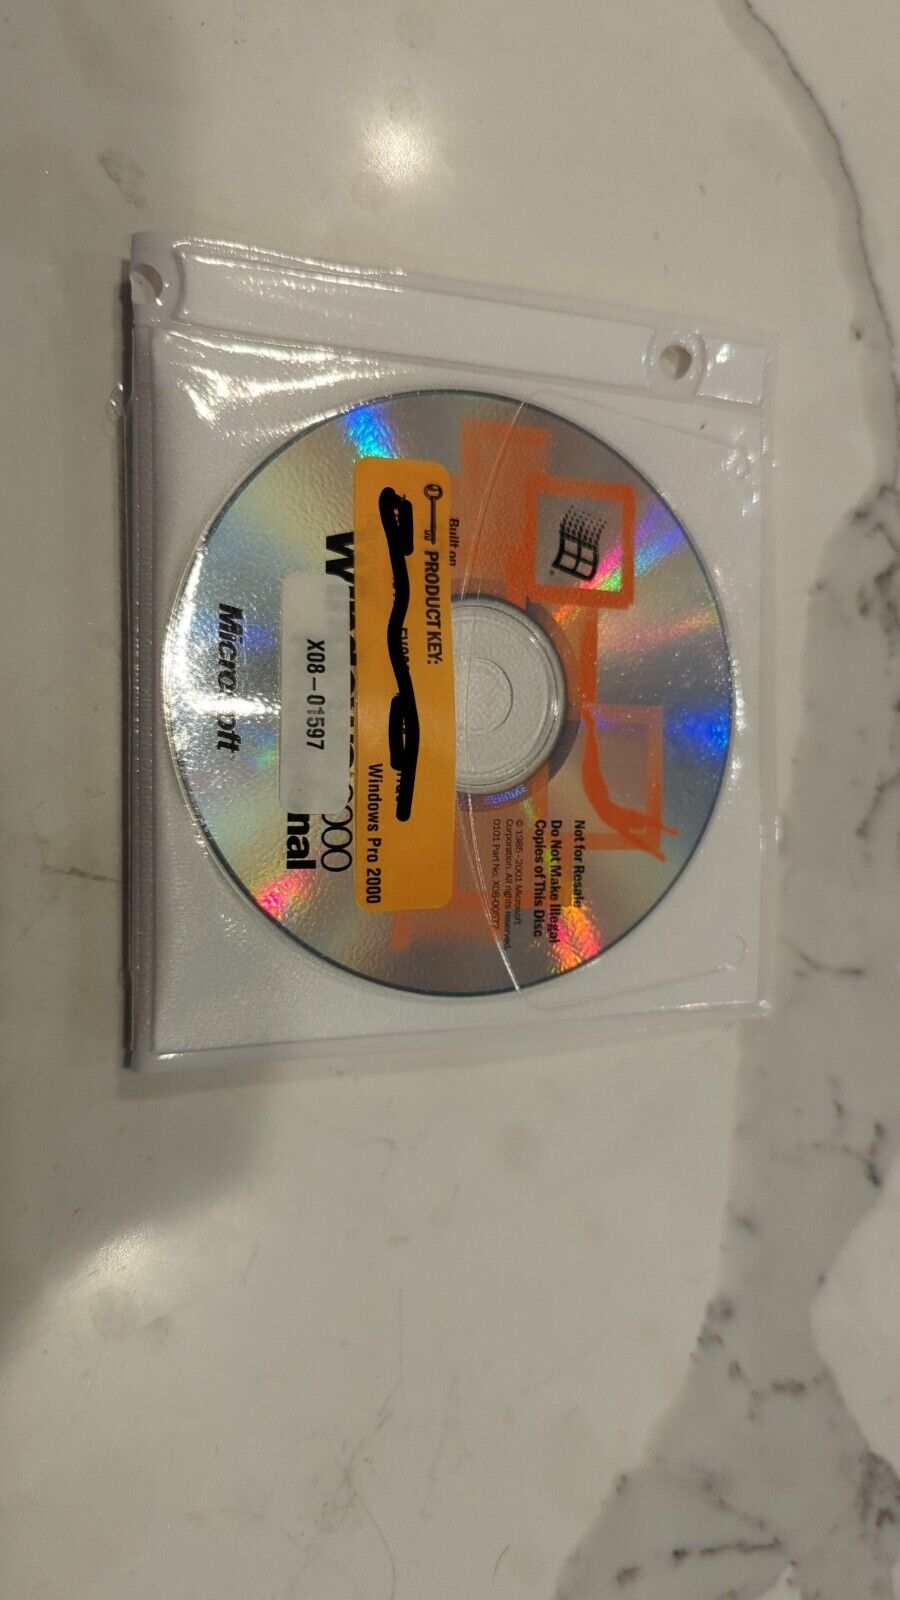 Genuine Microsoft Windows 2000 Professional Software Disc with Product Key